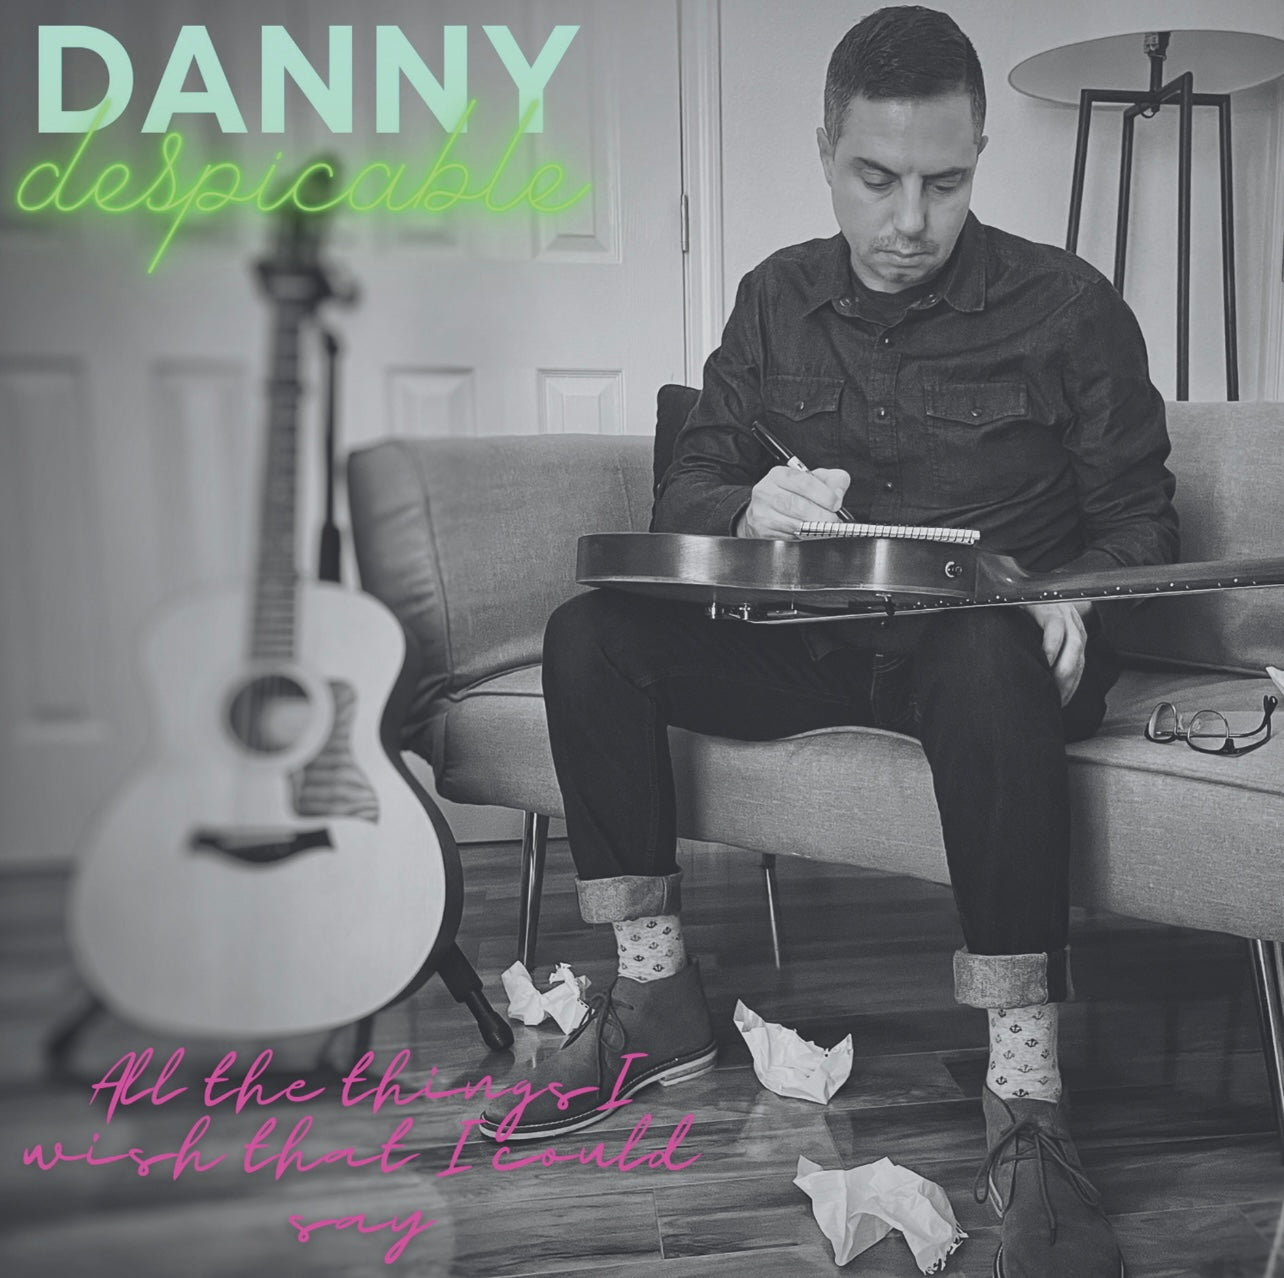 OMR-053 Danny Despicable “All The Things I Wish That I Could Say” CD/EP